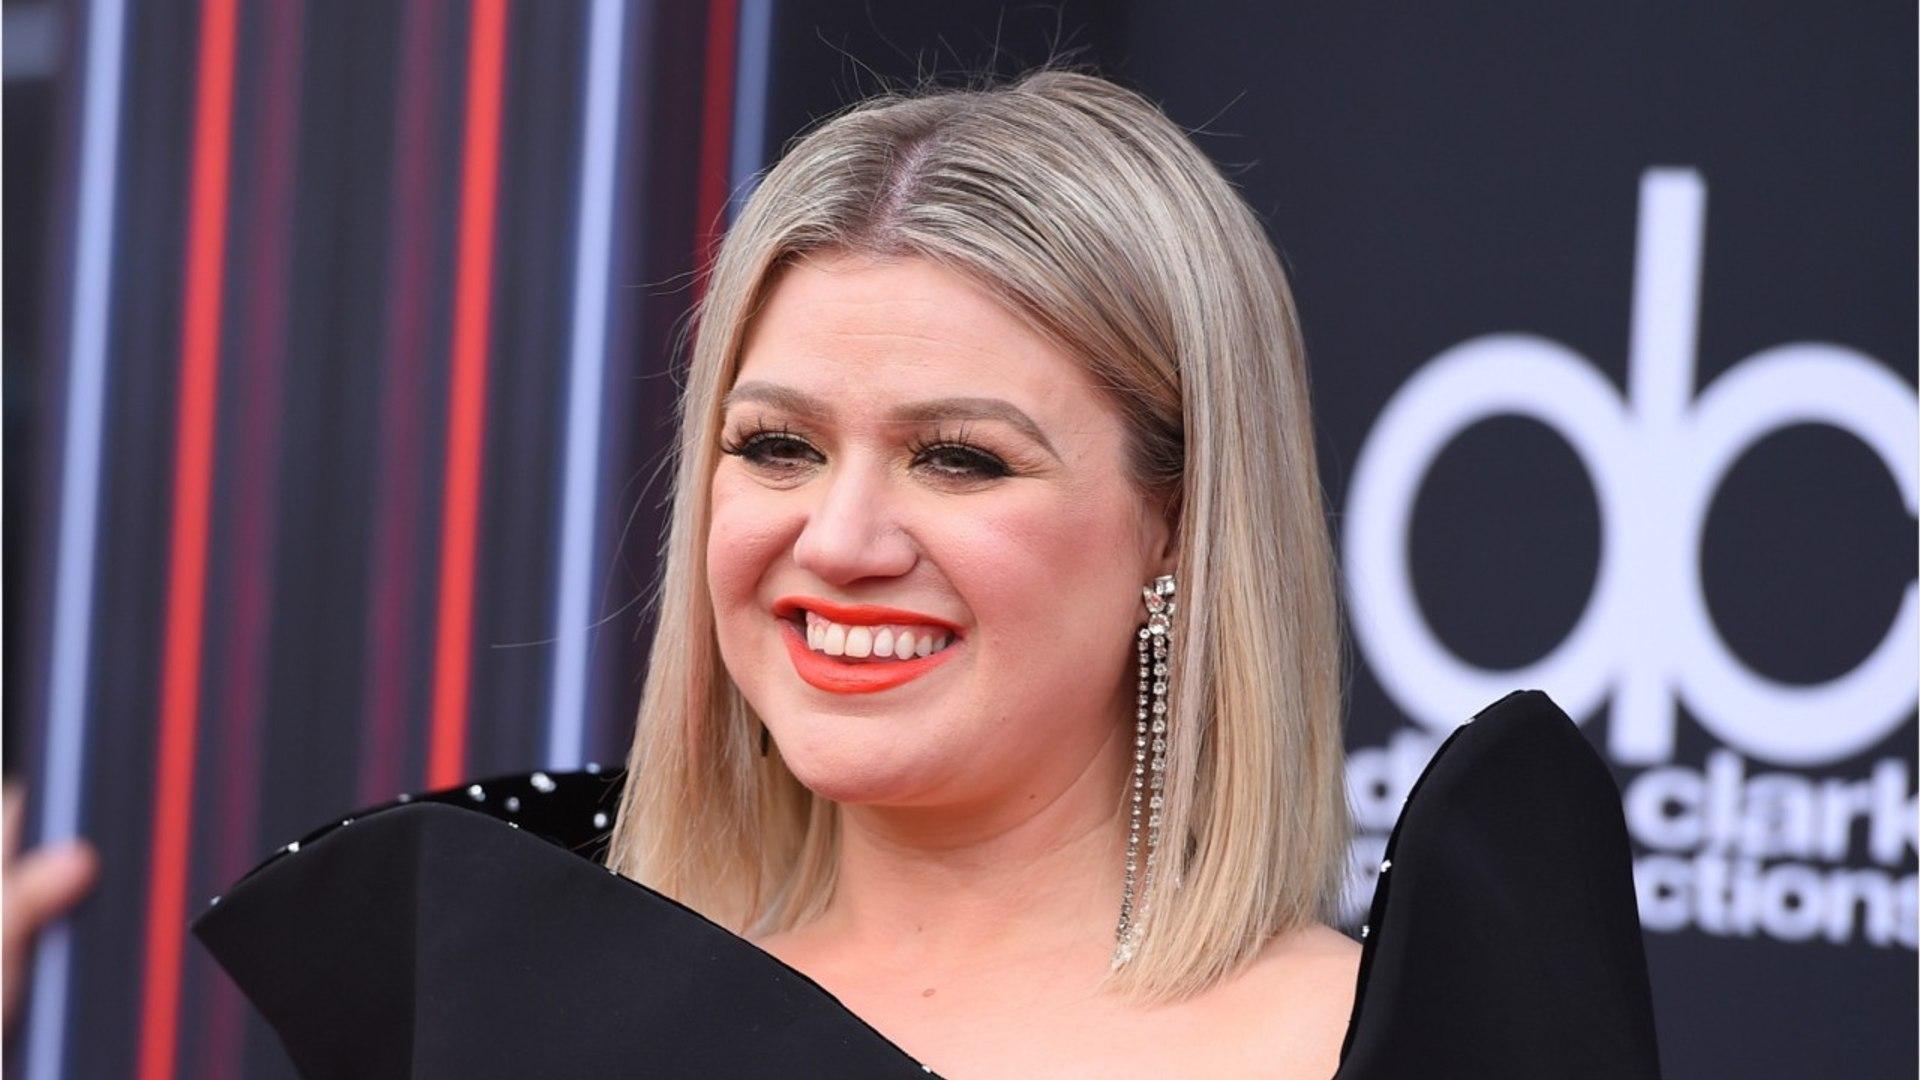 Kelly Clarkson Gets Set For 2019 Tour